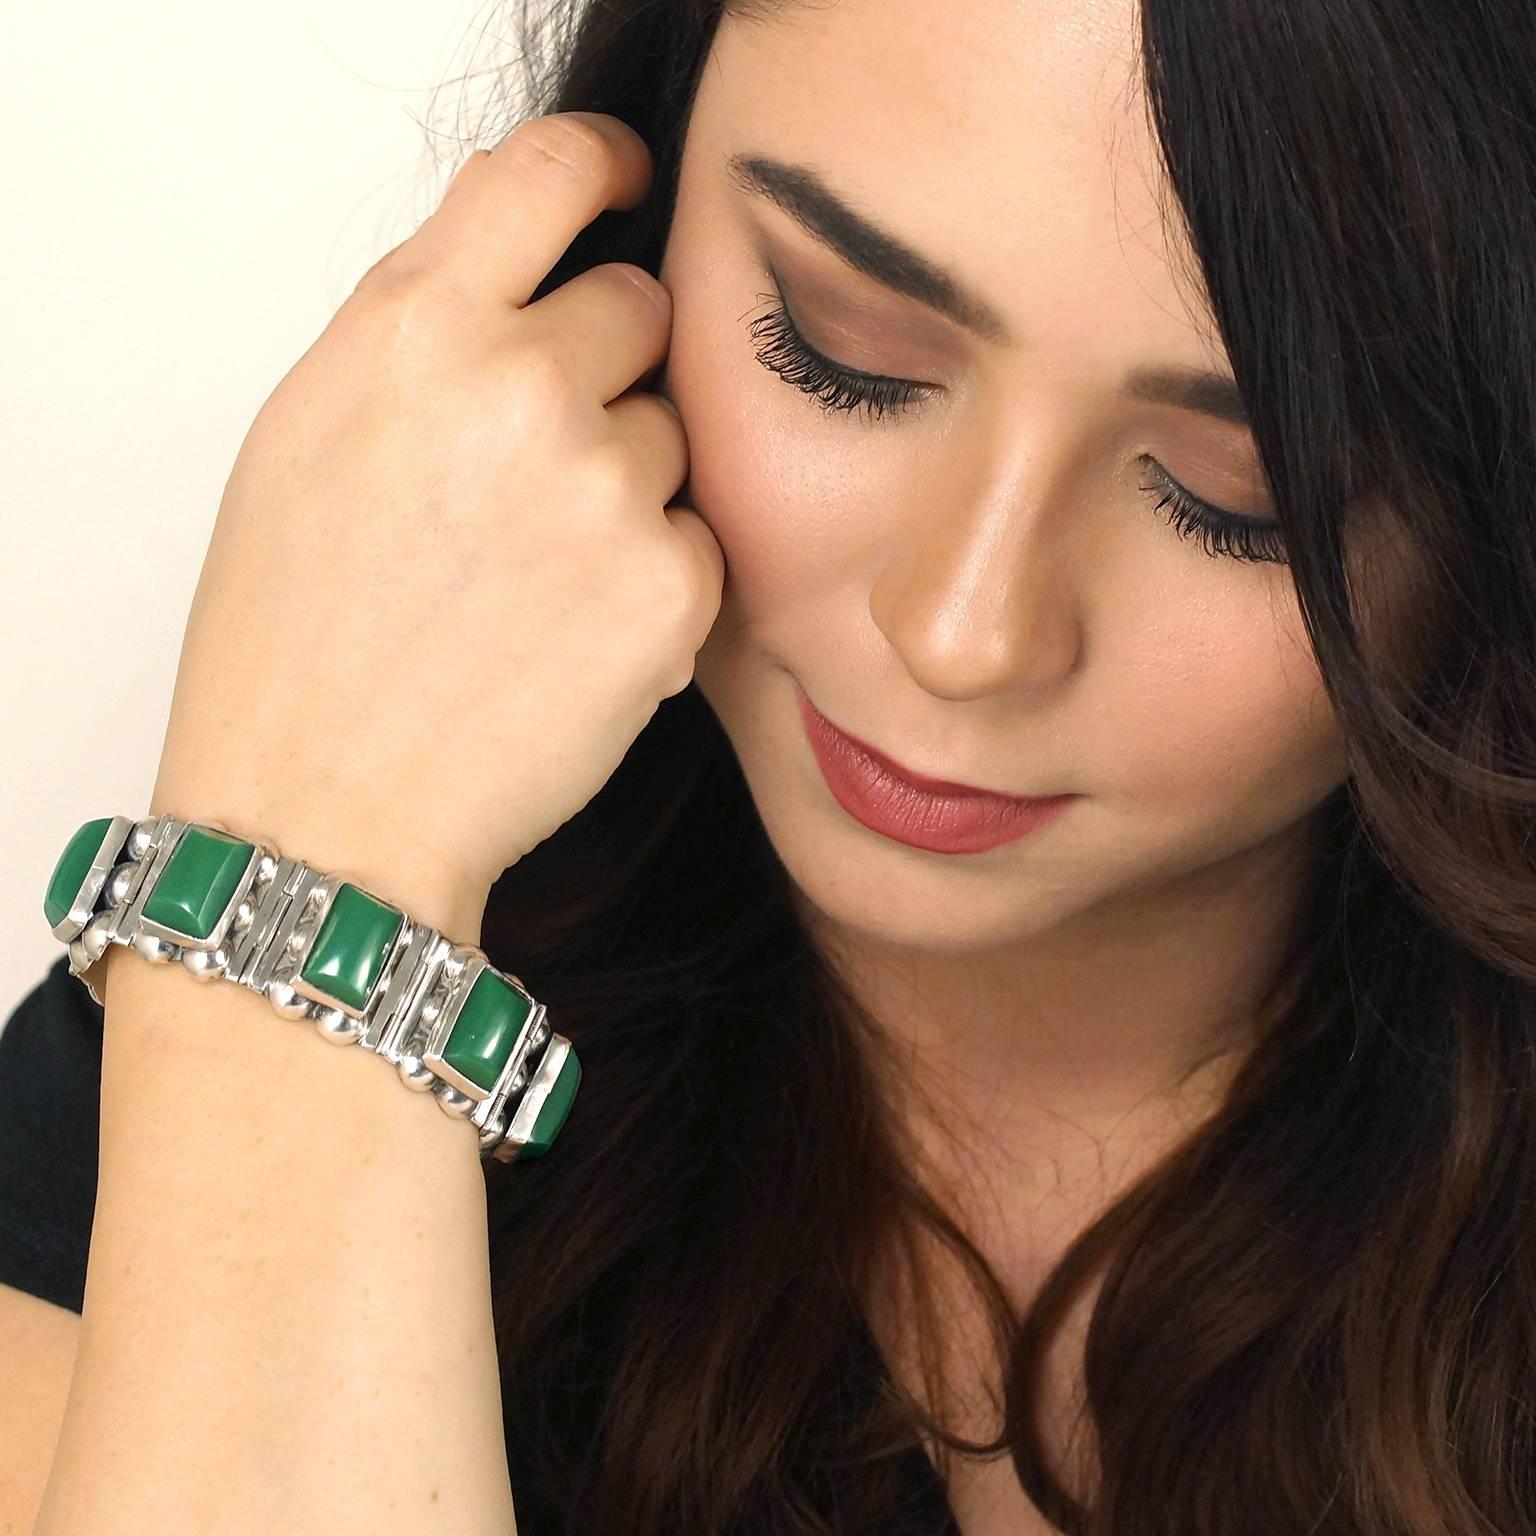 Circa 1960s, Sterling, Mexico.  Bold sixties fashion meets the cool organic feel of Mexican silver-smithing in this vibrant Jensen-esque bracelet. Set with Mexican jade (sometimes green onyx, sometimes glass) this fabulous bracelet brings a